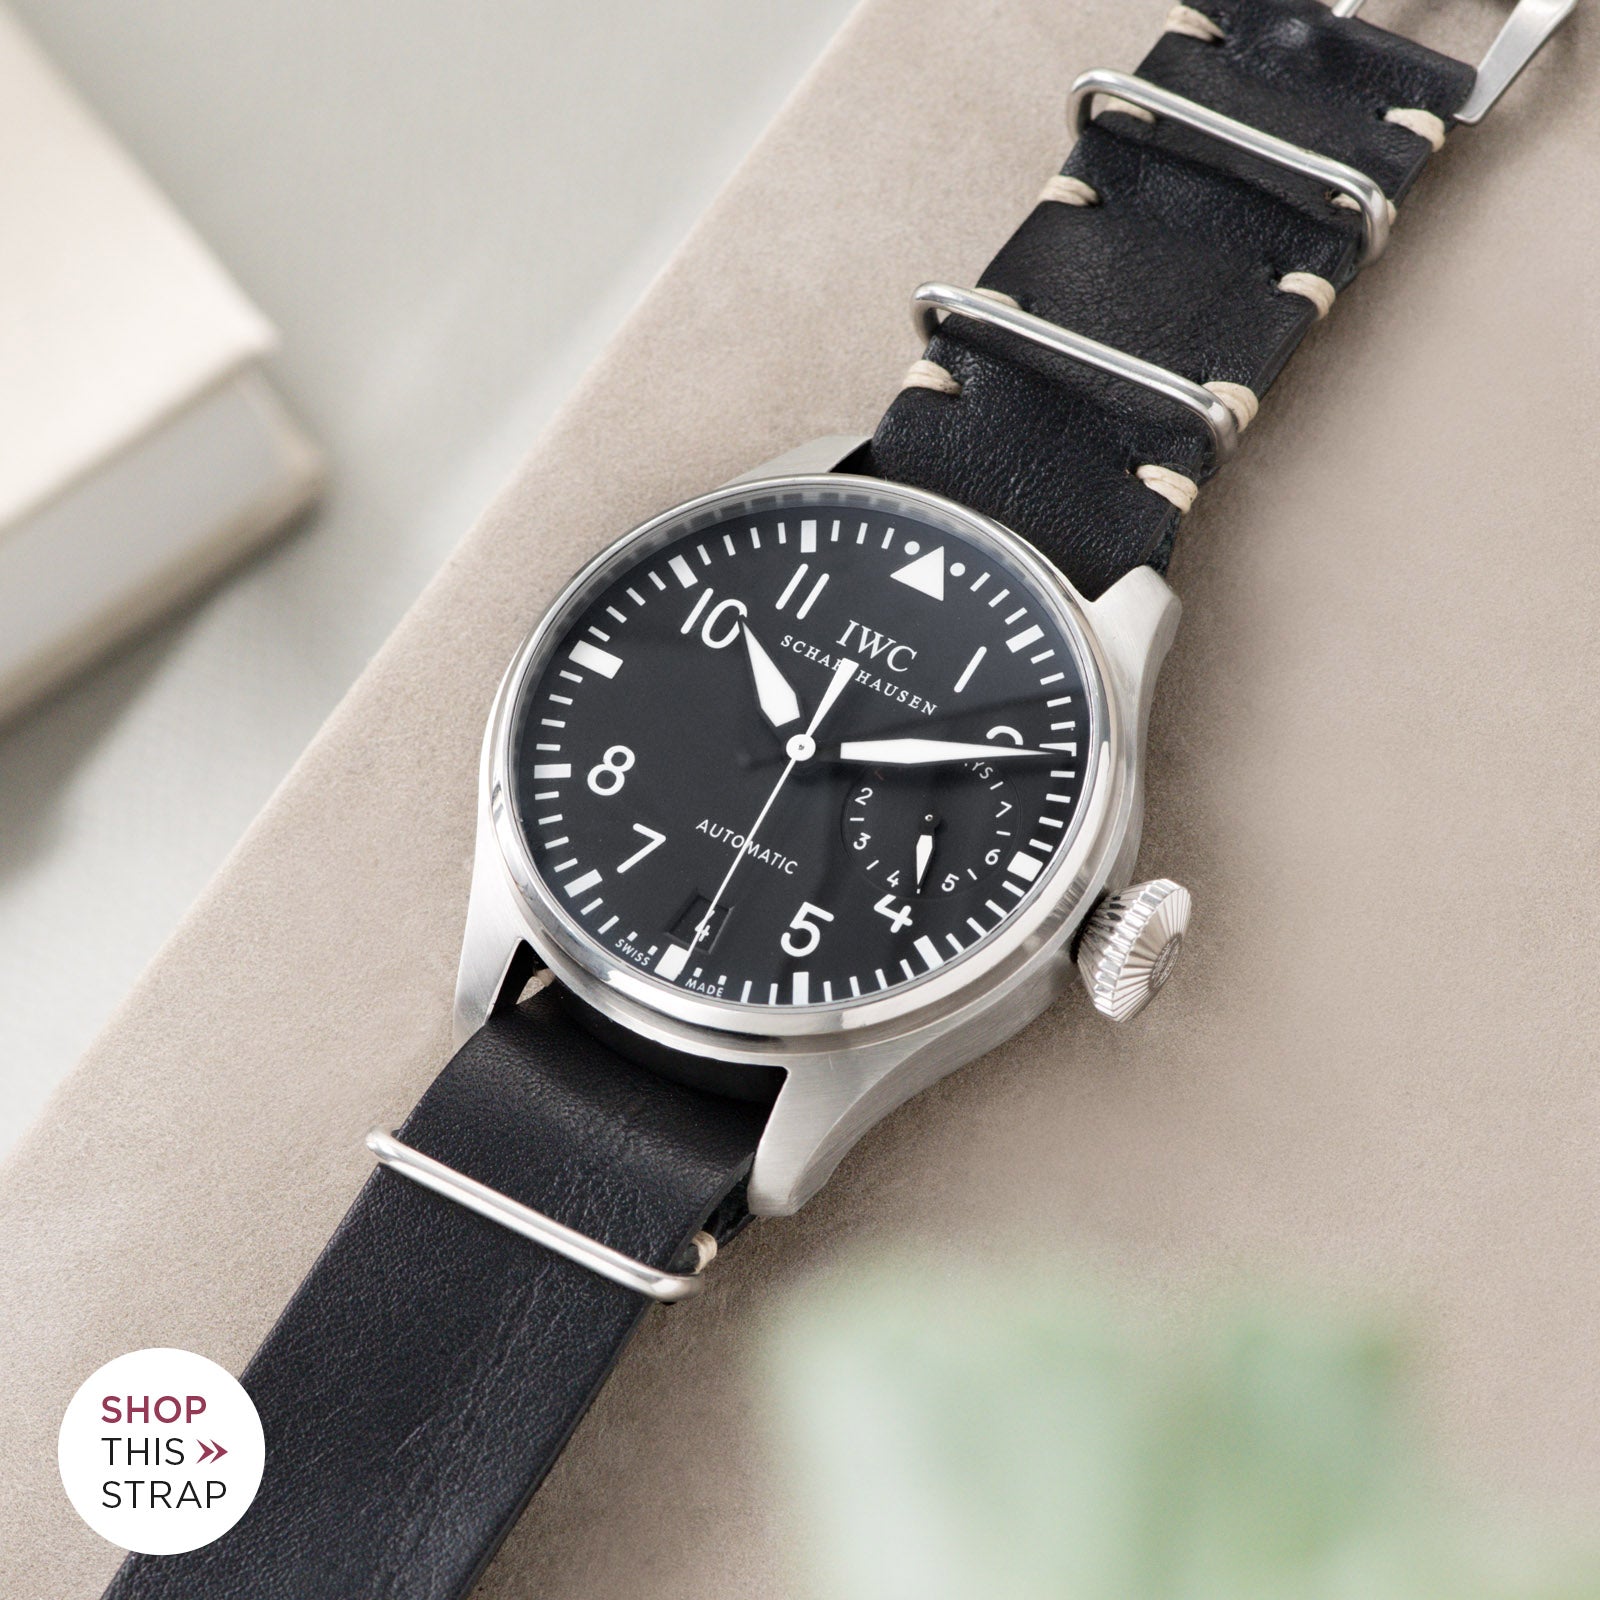 Bulang and Sons_Strap Guide_IWC Big Pilot Ref 5004_Black Nato Leather Watch Strap